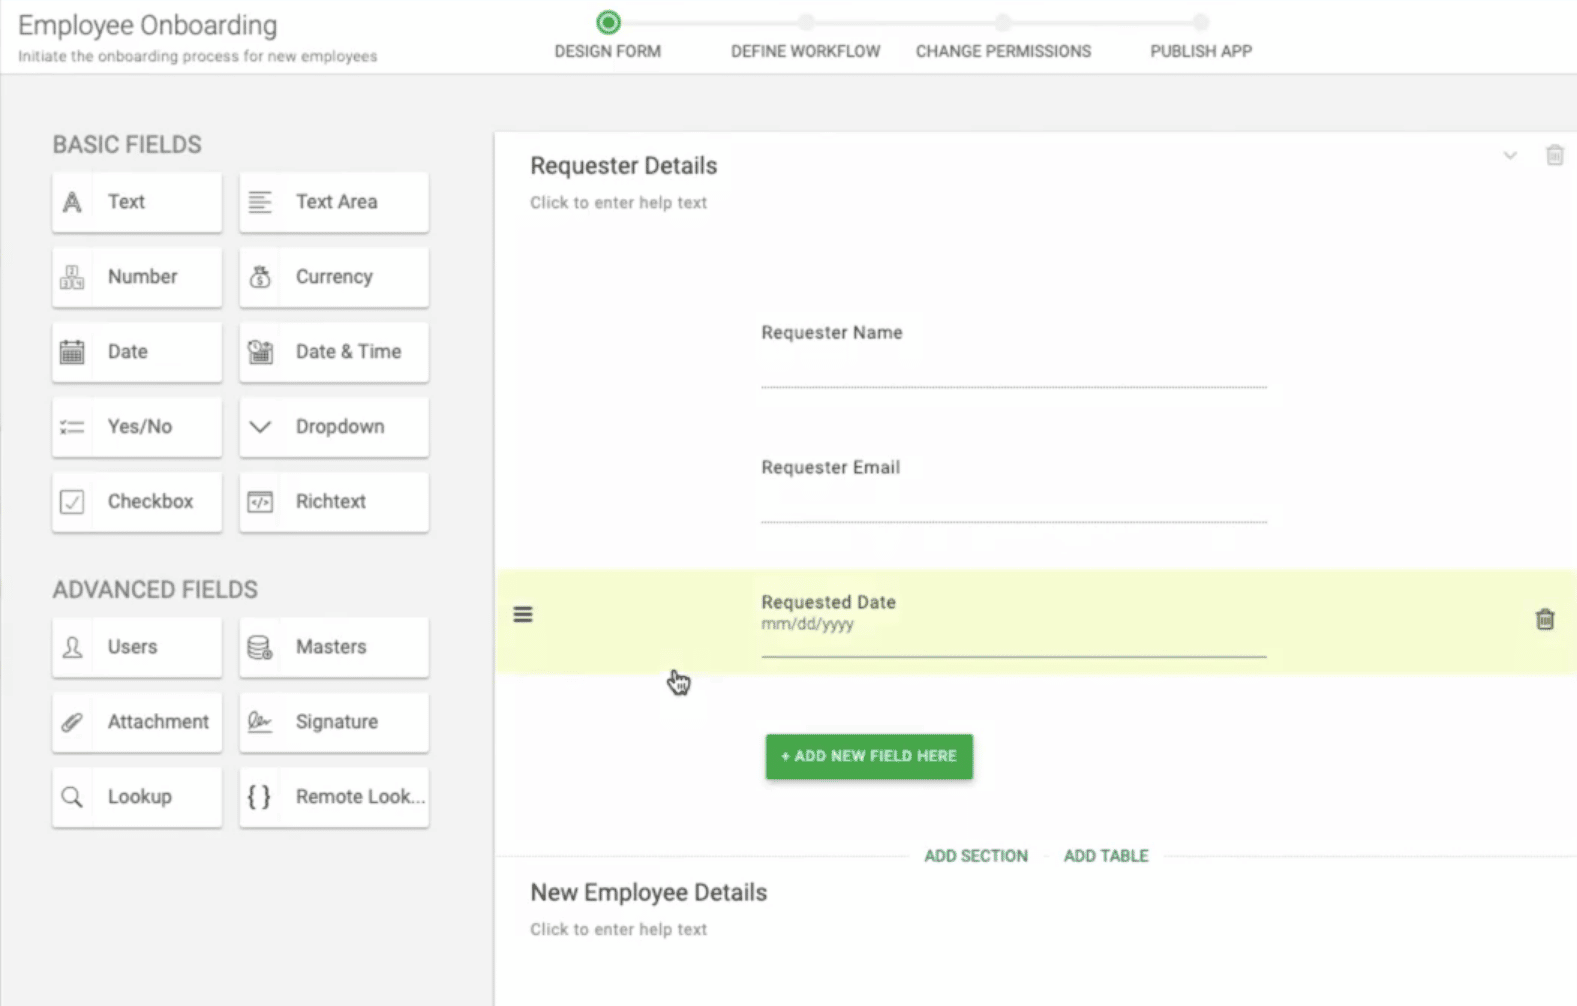 Kissflow has drag/drop workflow editor and employee onboarding process templates as illustrated here